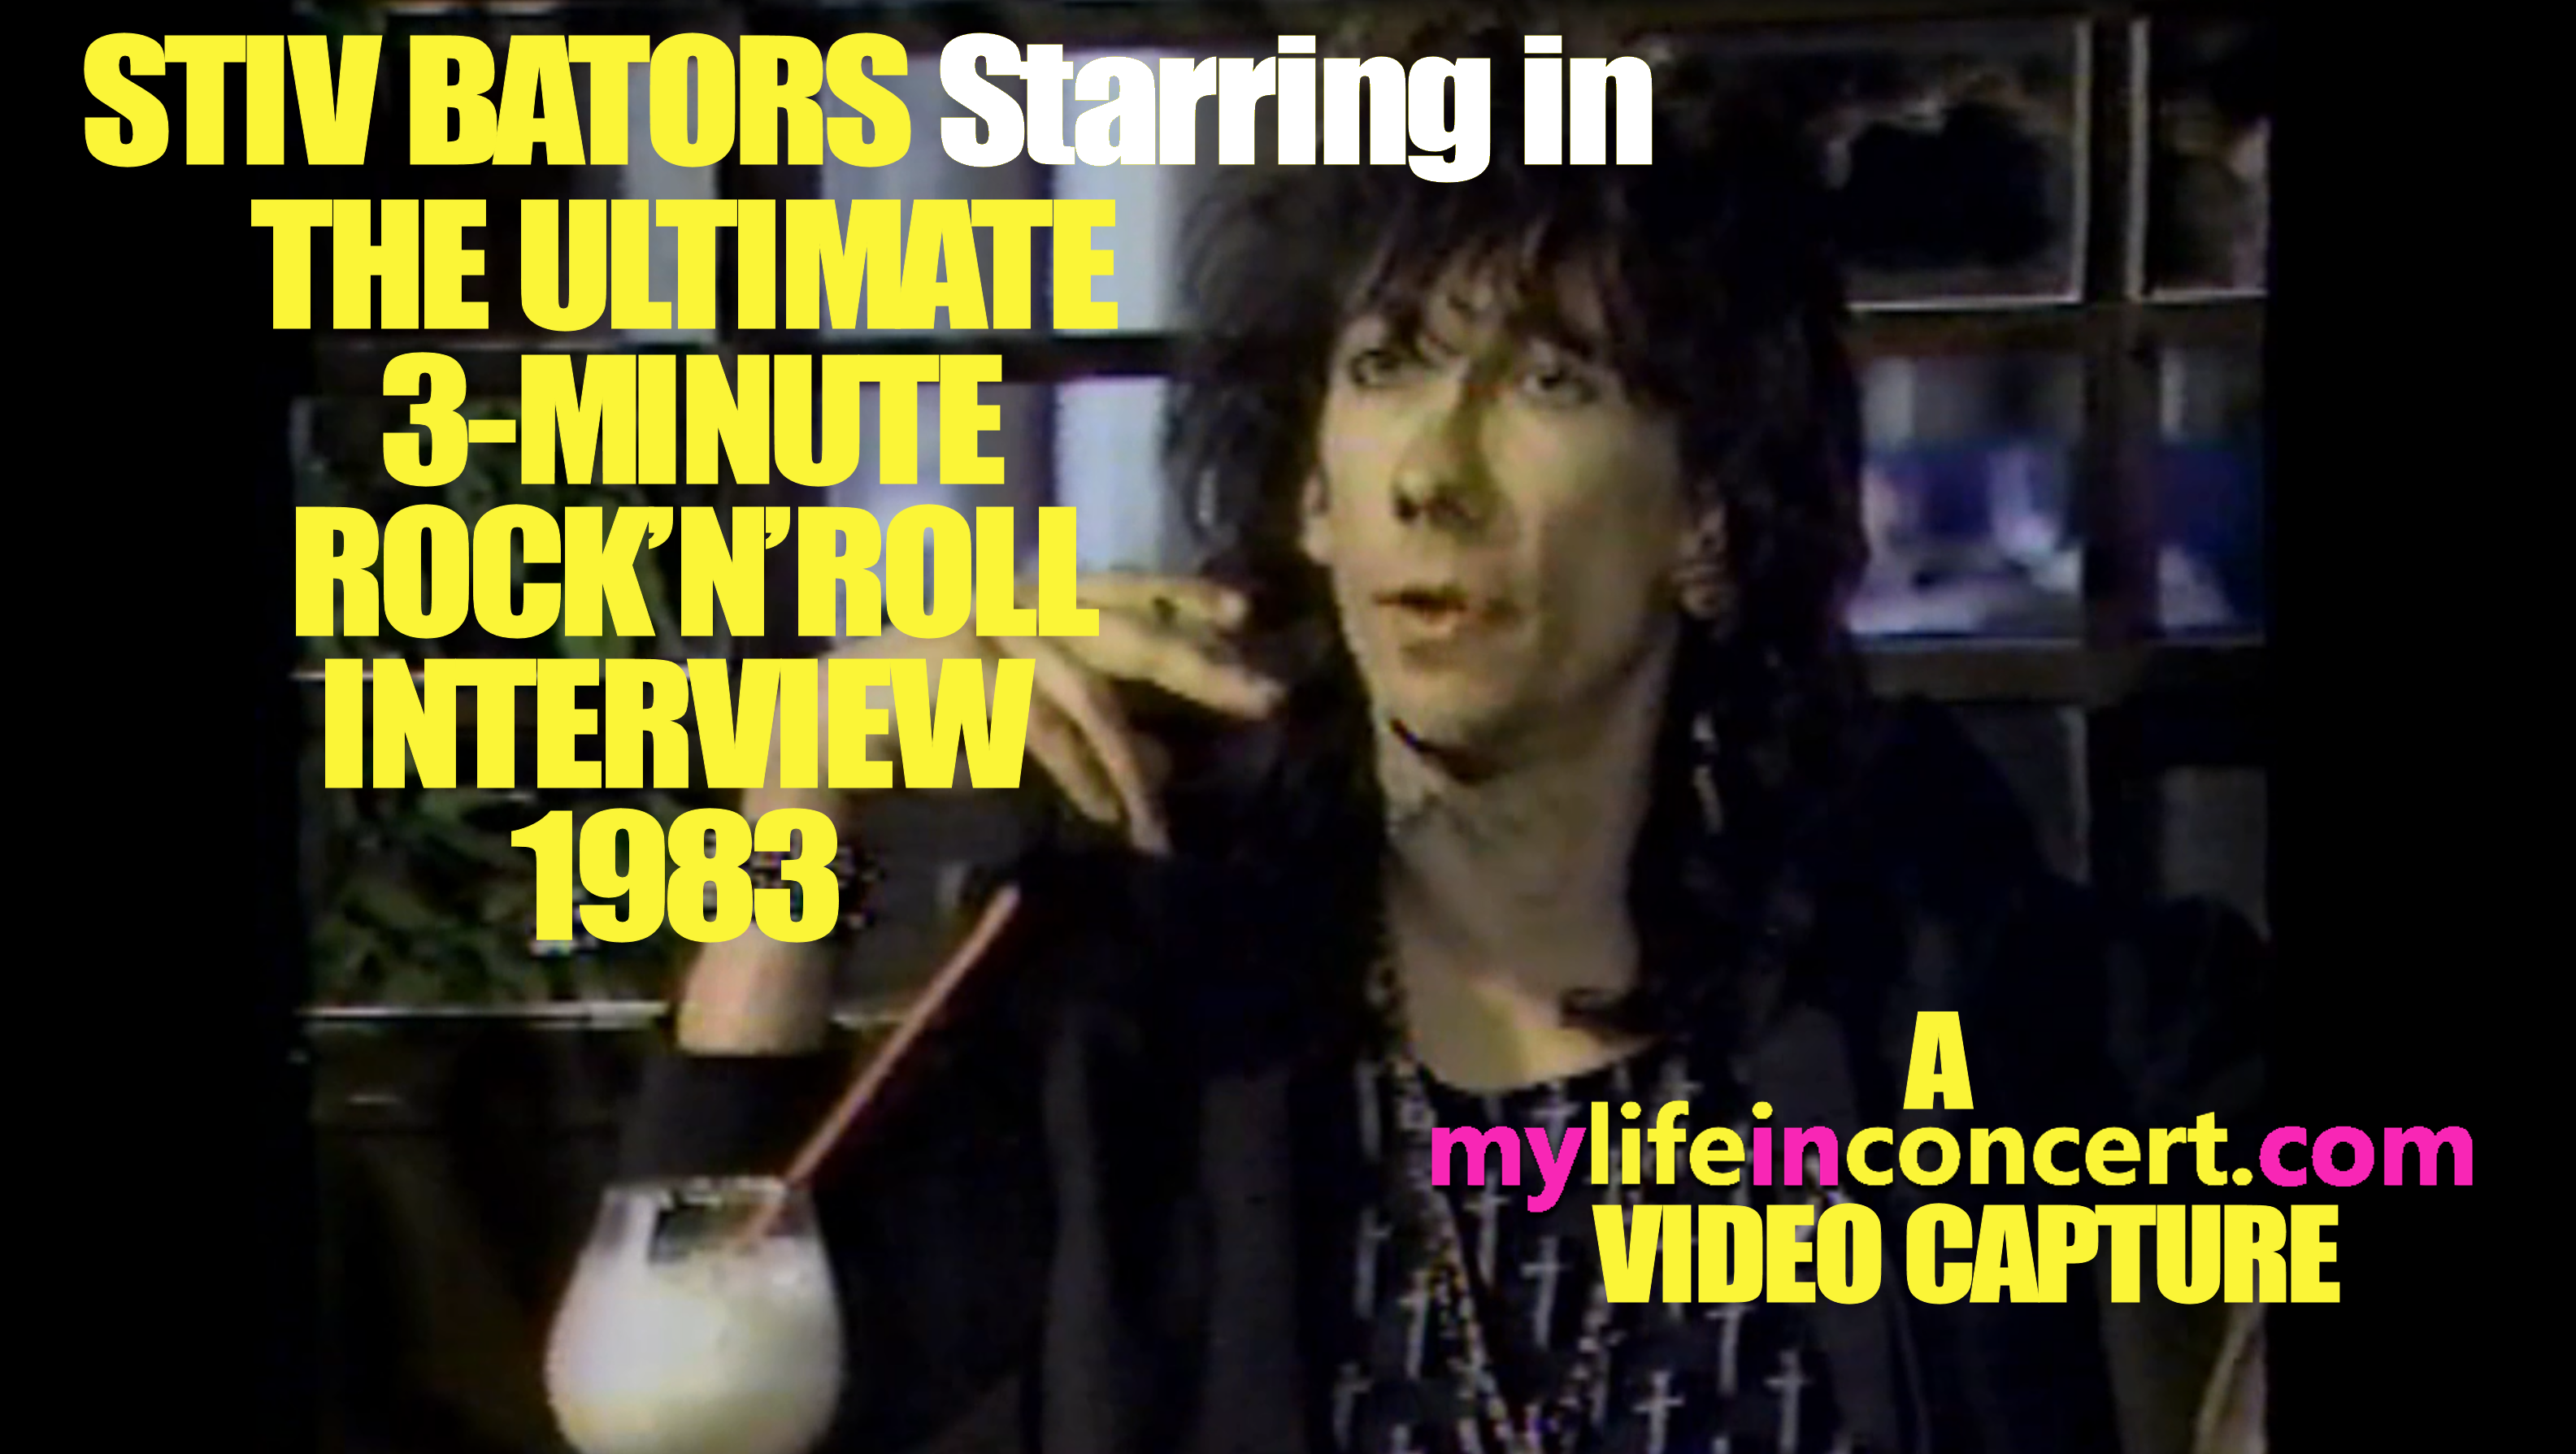 STIV BATORS Starring in THE ULTIMATE 3-MINUTE ROCK’N’ROLL INTERVIEW 1983 (A mylifeinconcert.com Video Capture)